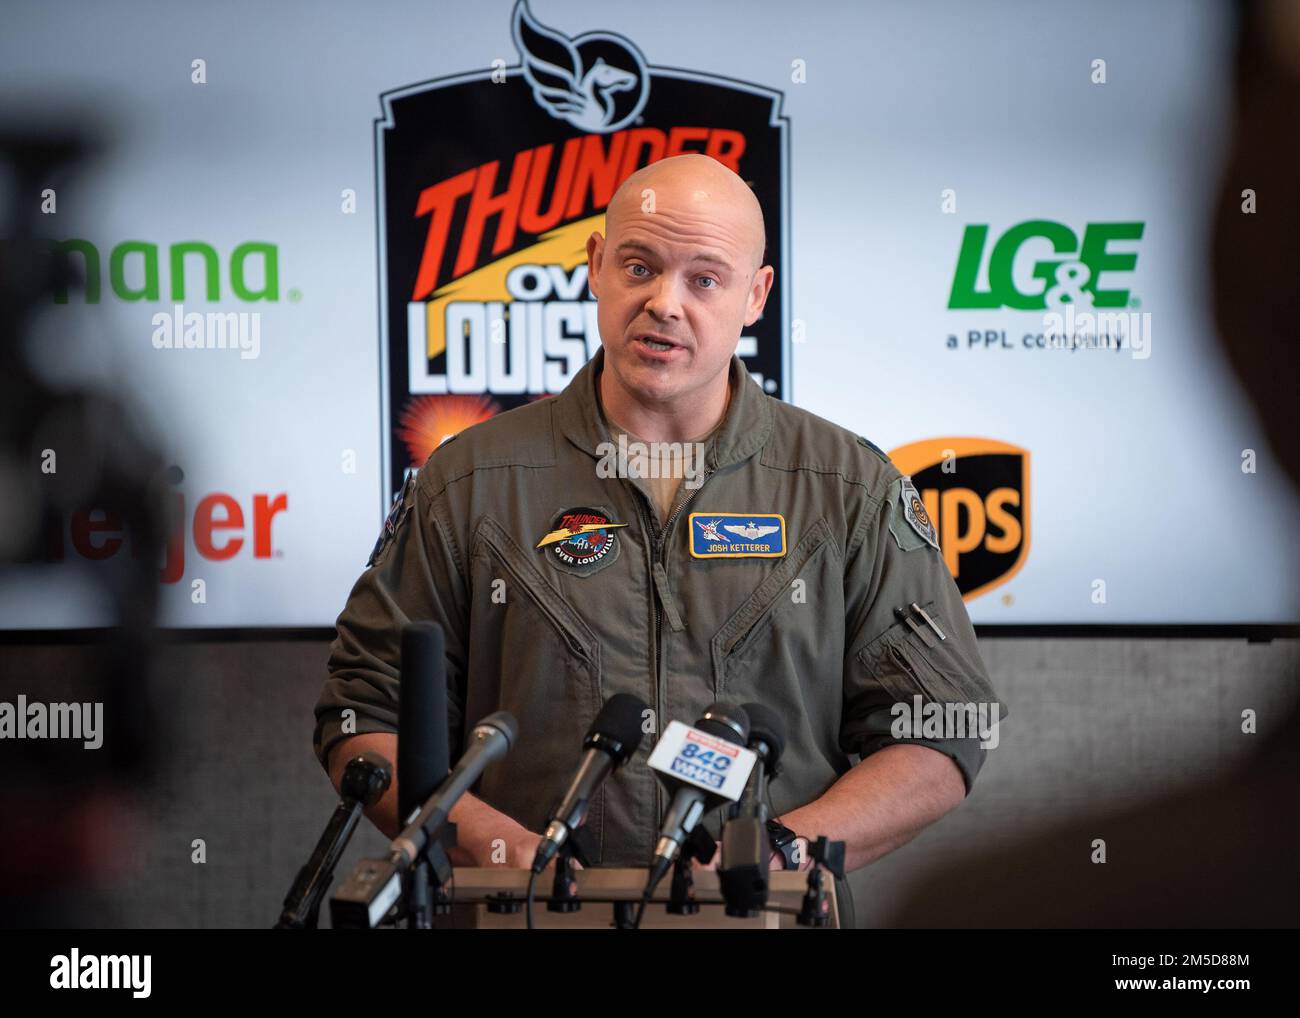 Lt. Col. Josh Ketterer, a pilot in the Kentucky Air National Guard, discusses the lineup of military aircraft slated to perform in the 2022 Thunder Over Louisville air show during a press conference held in Louisville, Ky., March 3, 2022. The event will return to the banks of the Ohio River after a two-year absence and is expected to feature dozens of planes, including the U.S. Air Force F-22 Raptor Demo Team and a brand-new C-130J Super Hercules from the Kentucky Air Guard. This year’s show celebrates the 75th anniversary of the United States Air Force. Stock Photo